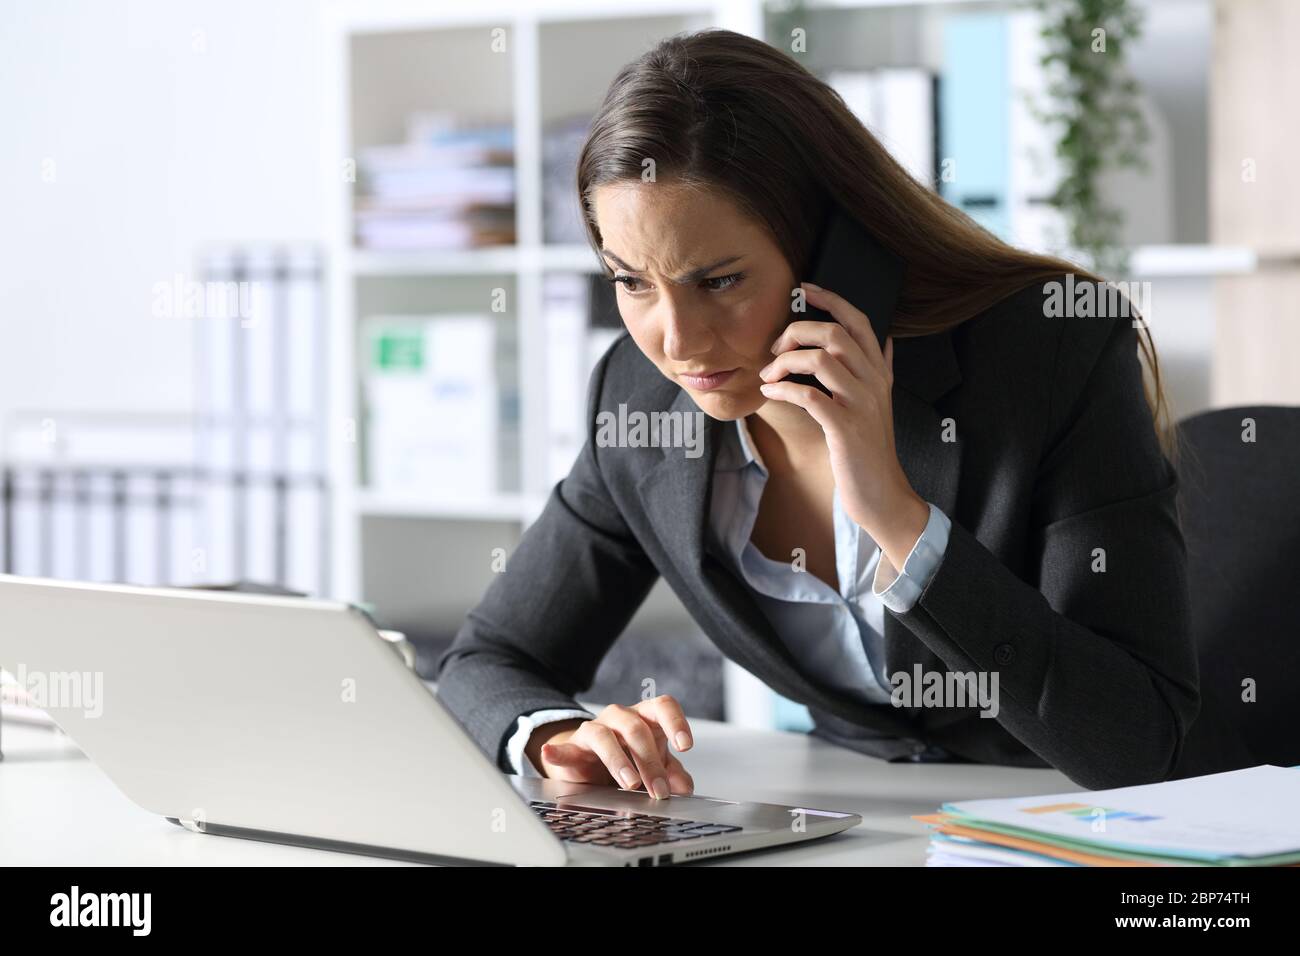 Suspicious executive woman calling on smart phone looking at laptop sitting on her desk at office Stock Photo